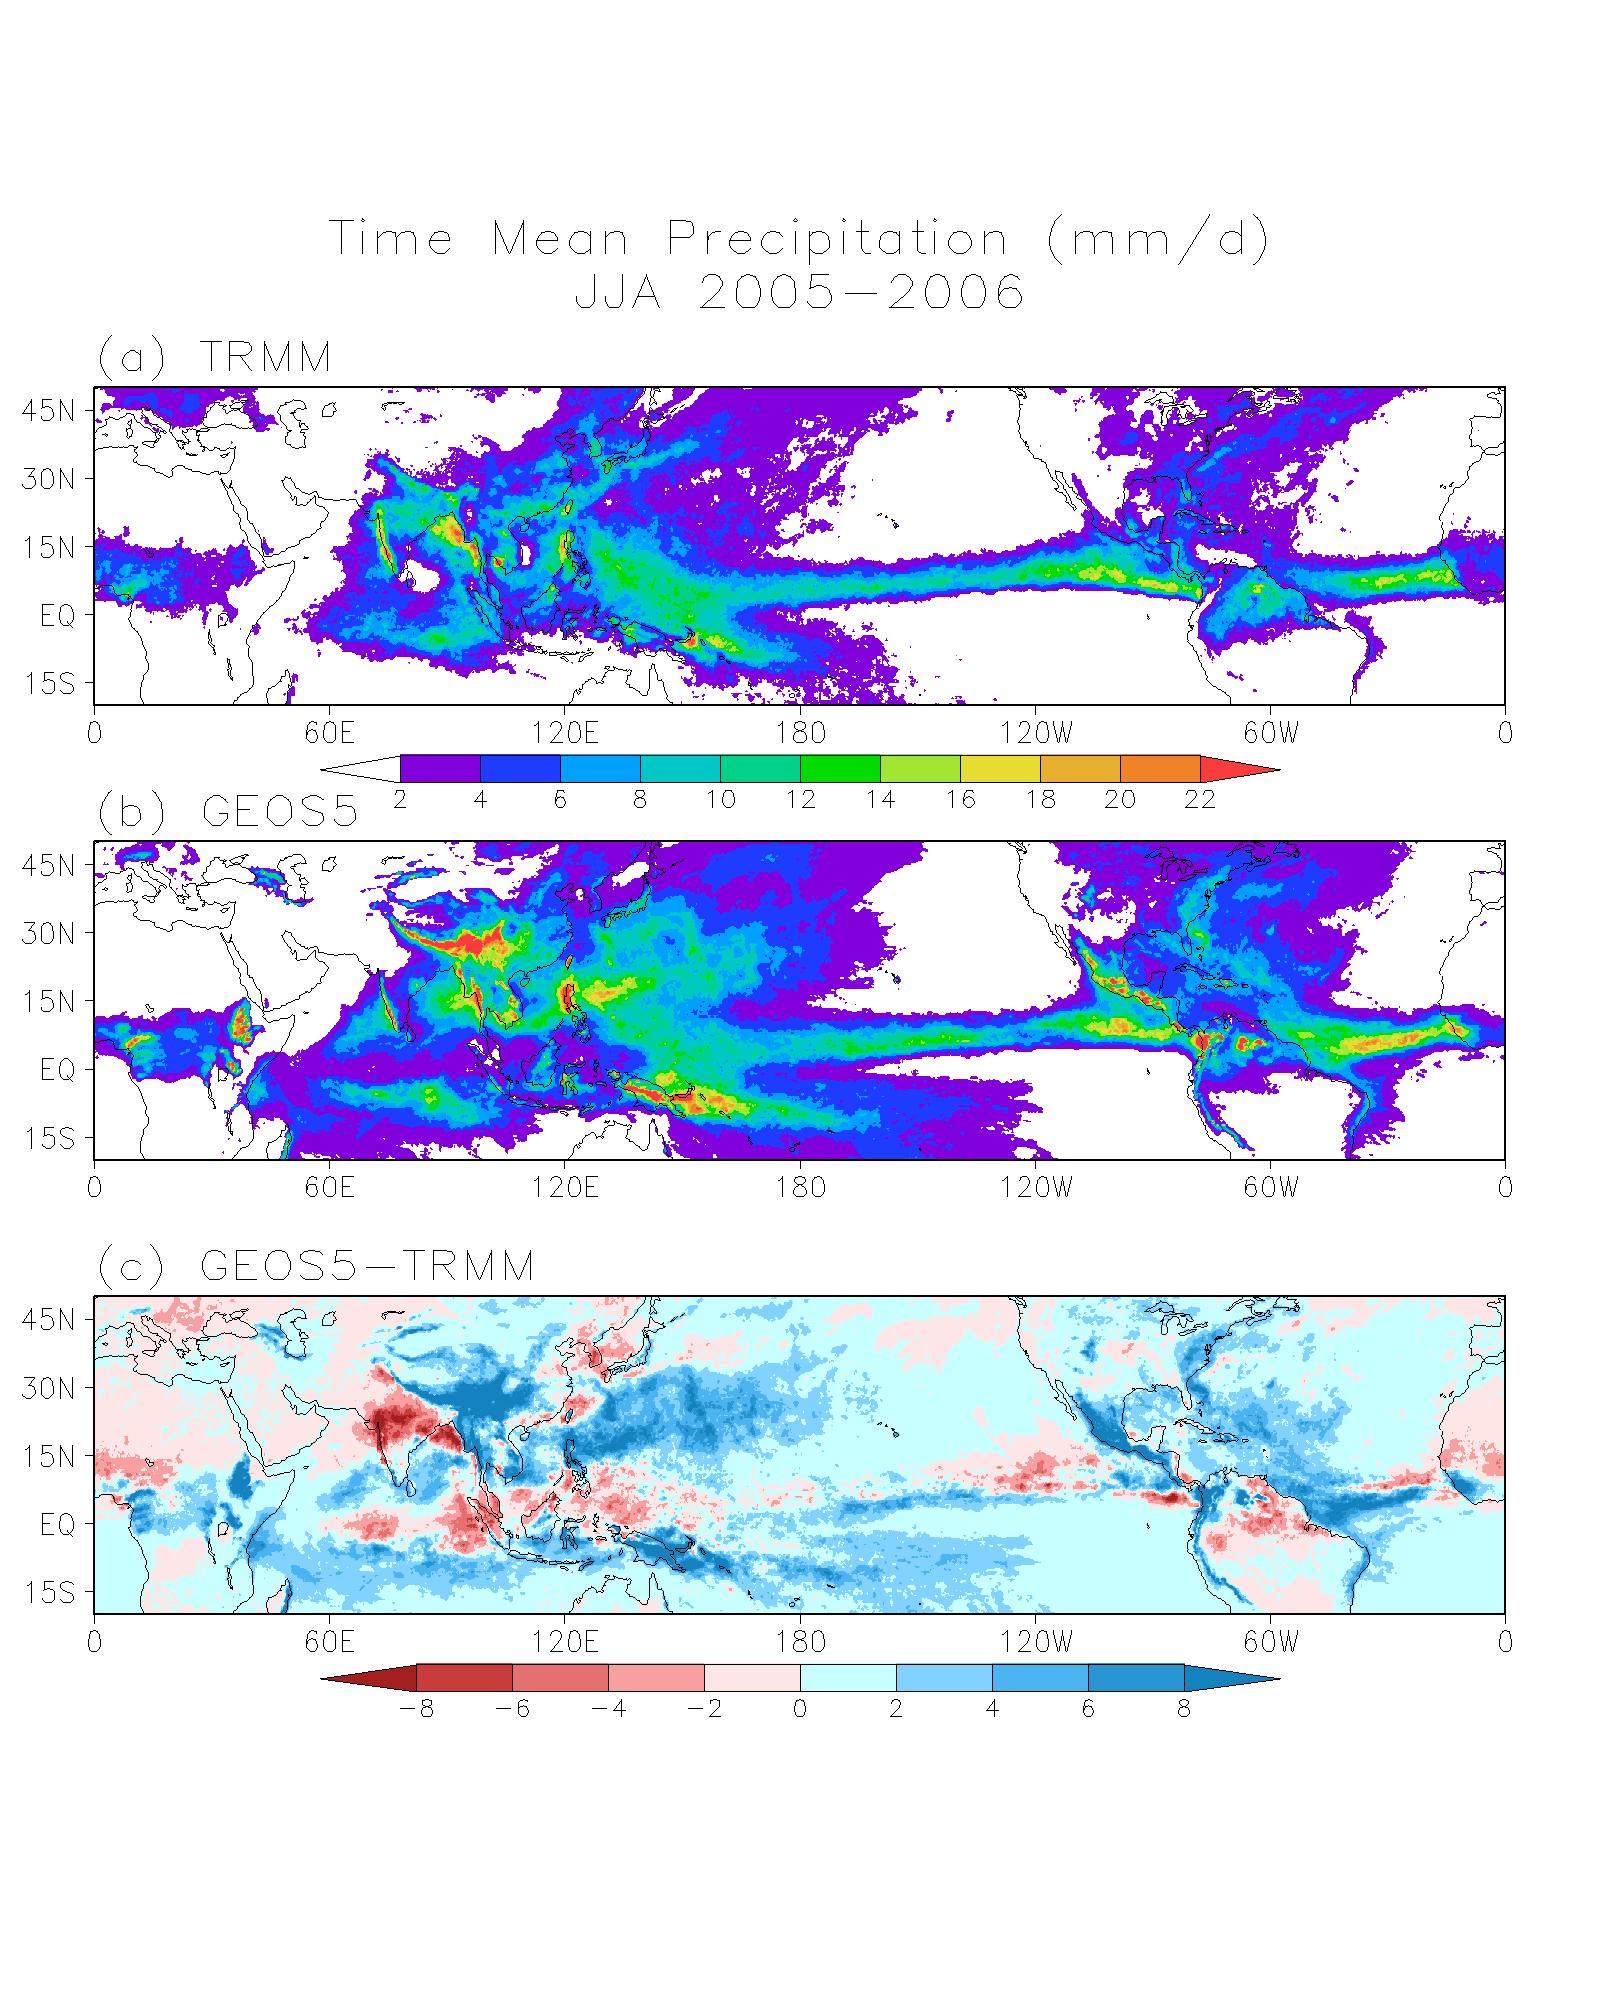 Summer-mean (June-August) precipitation from (a) the TRMM observations and (b) the GEOS-5 model simulation in 14-km horizontal resolution, averaged for 2005-2006. (c) is the difference of (b)-(a), indicating the model bias.